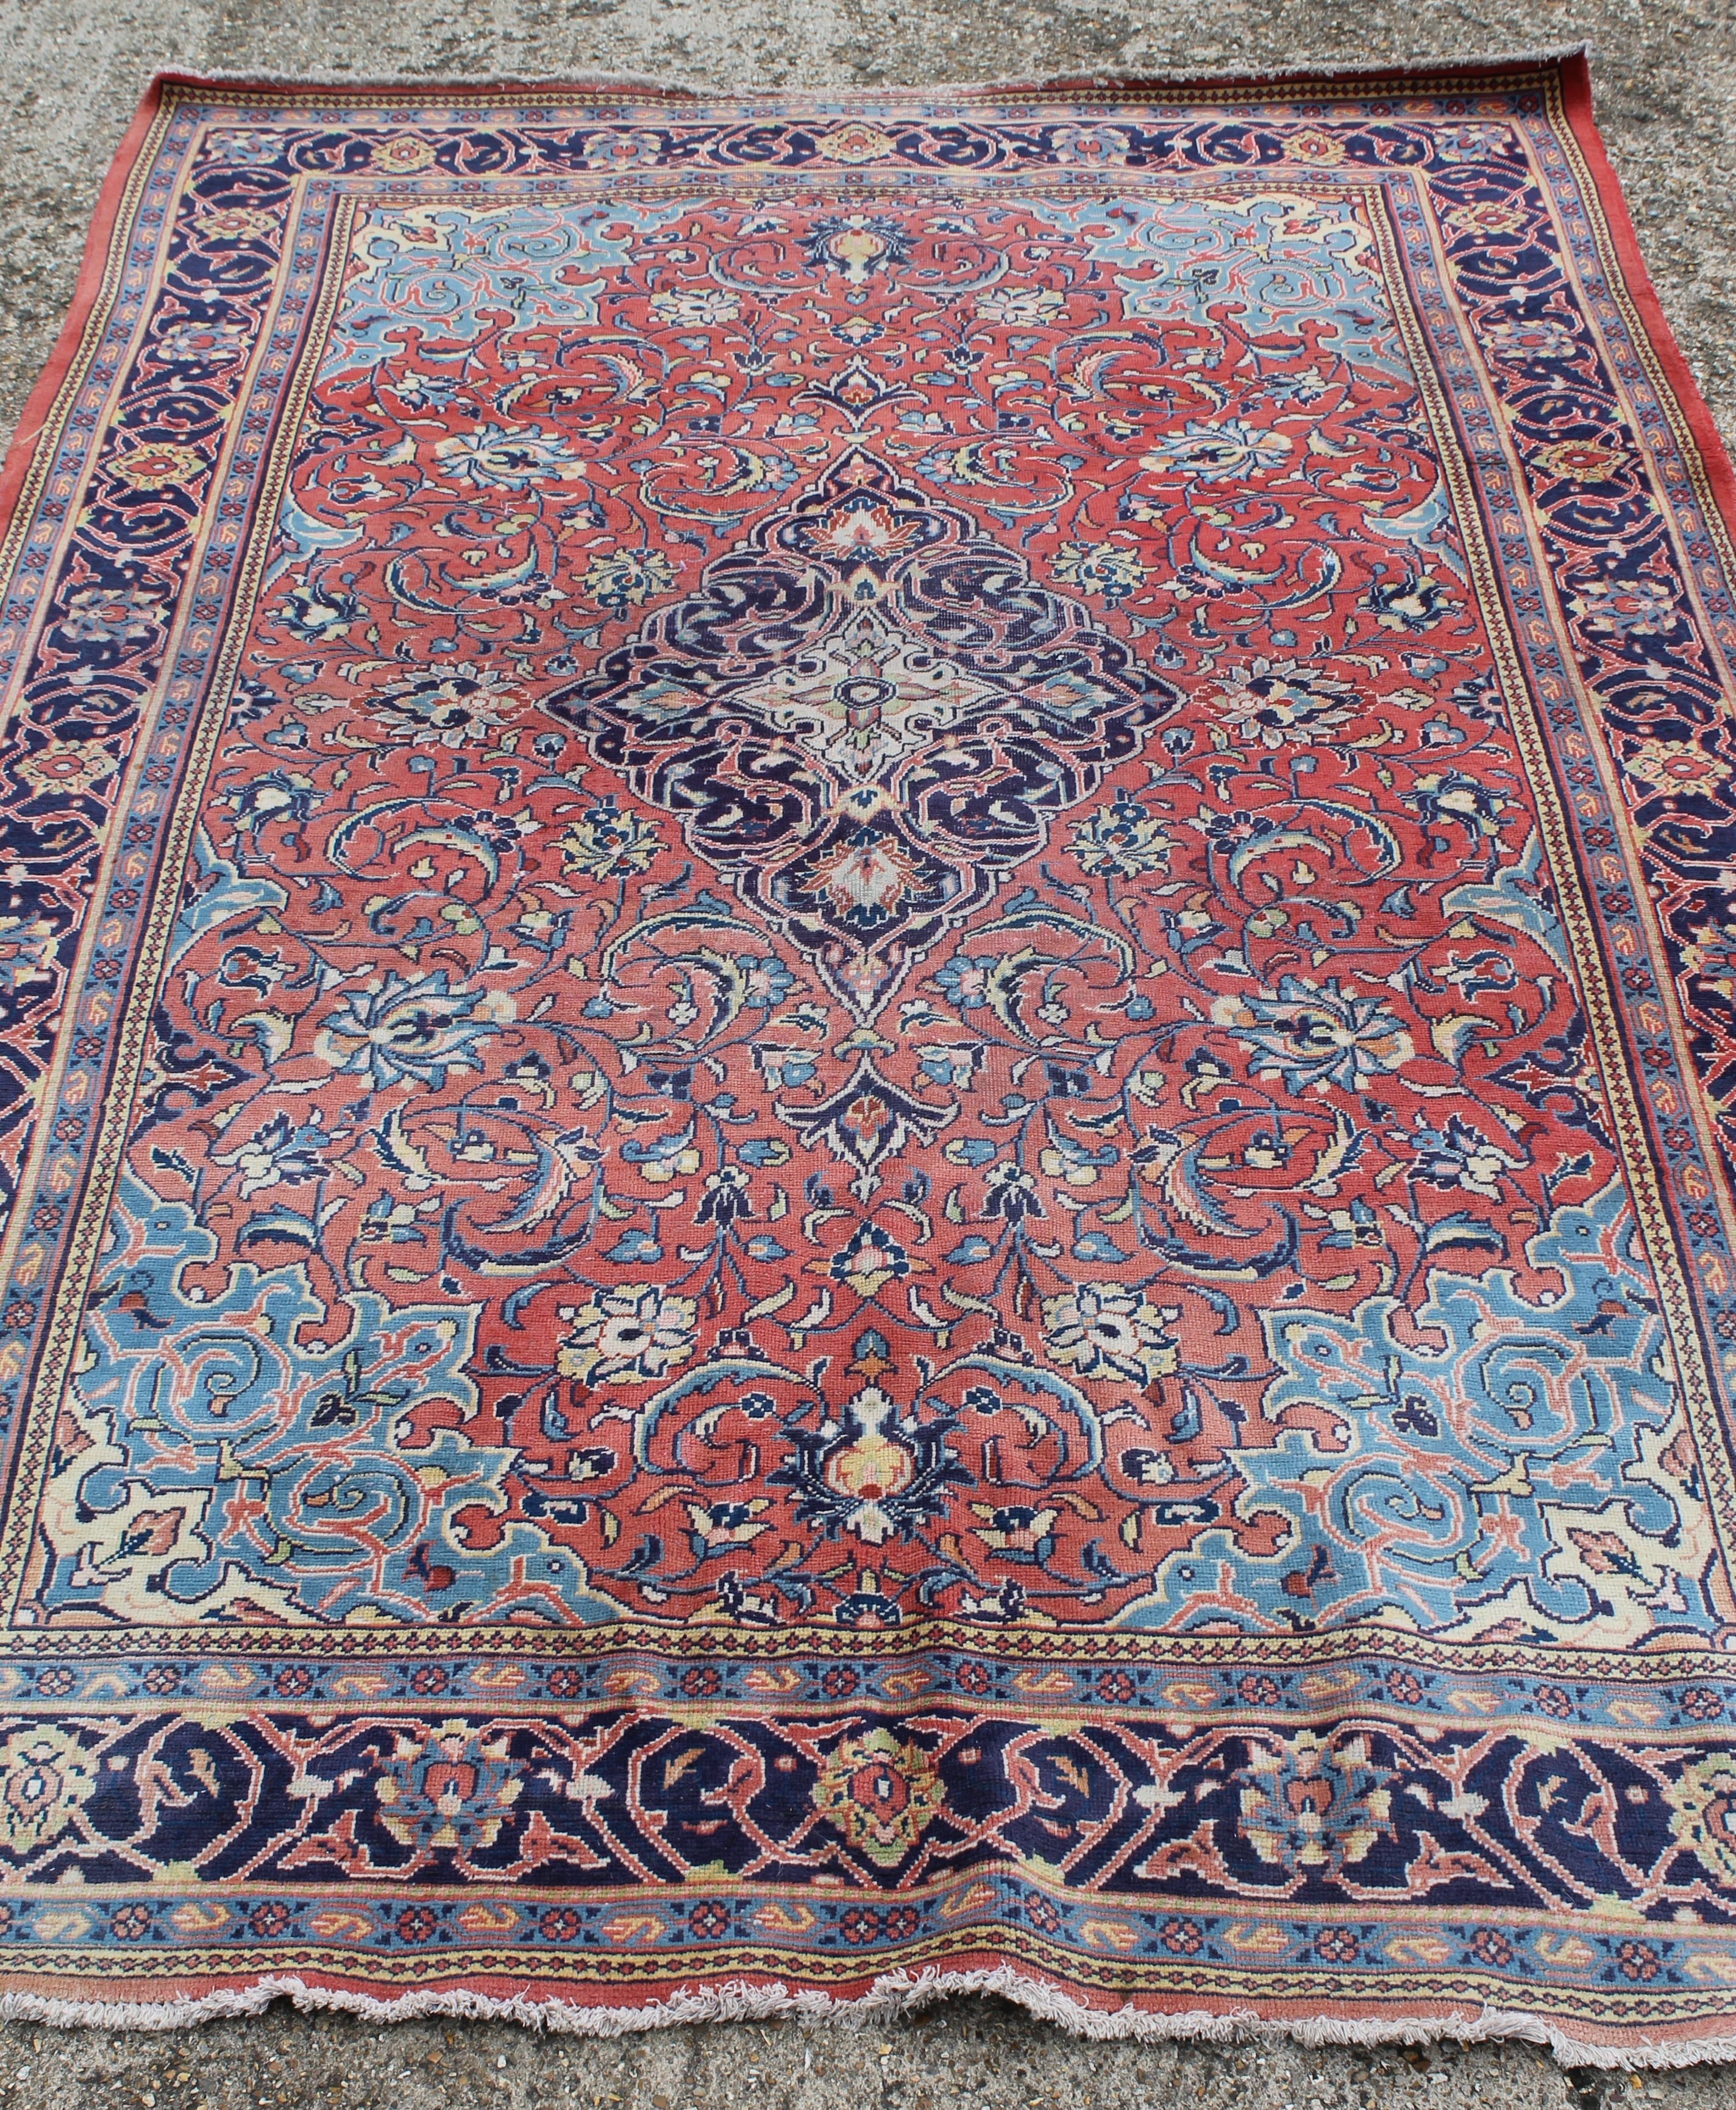 A large Iranian red ground wool rug. 330 x 222 cm.